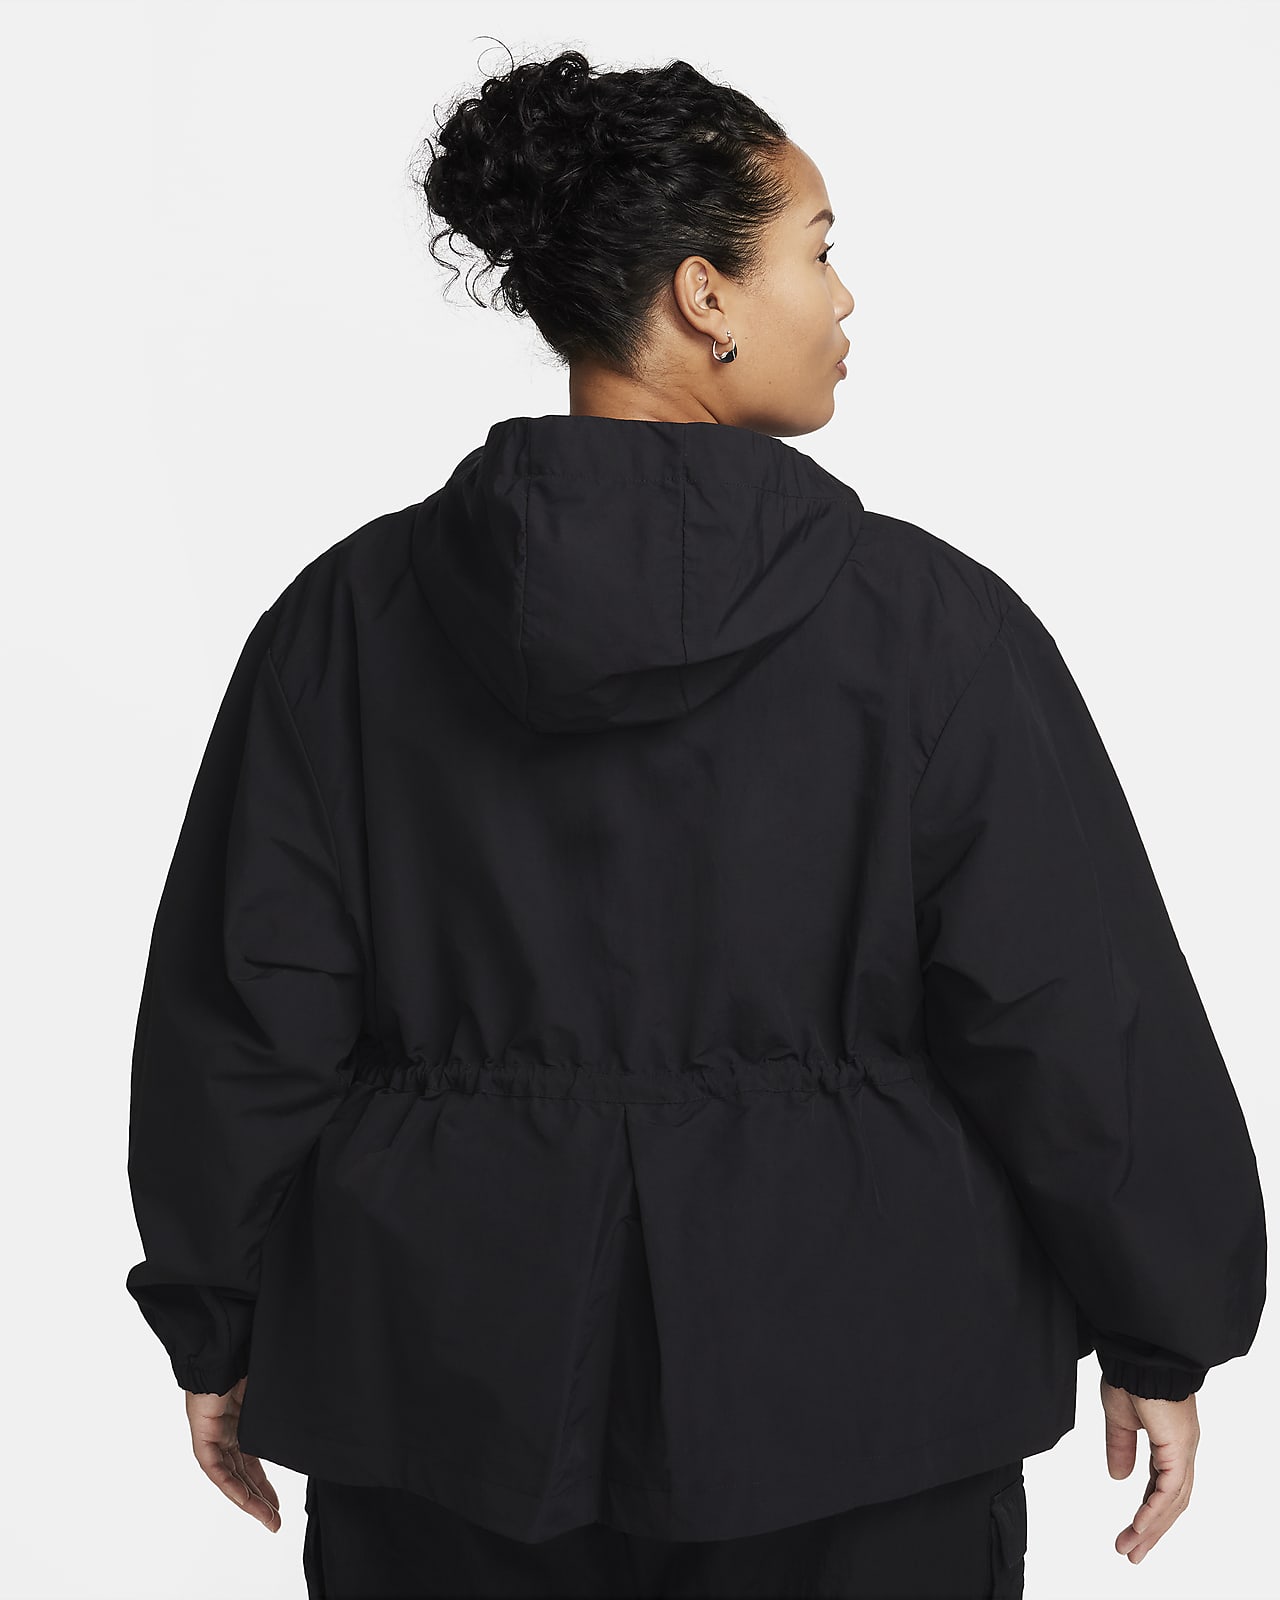 https://static.nike.com/a/images/t_PDP_1280_v1/f_auto,q_auto:eco/9cfdcbc6-3001-445c-b05a-a10b3f2dc638/sportswear-everything-wovens-oversized-hooded-jacket-h32nsG.png